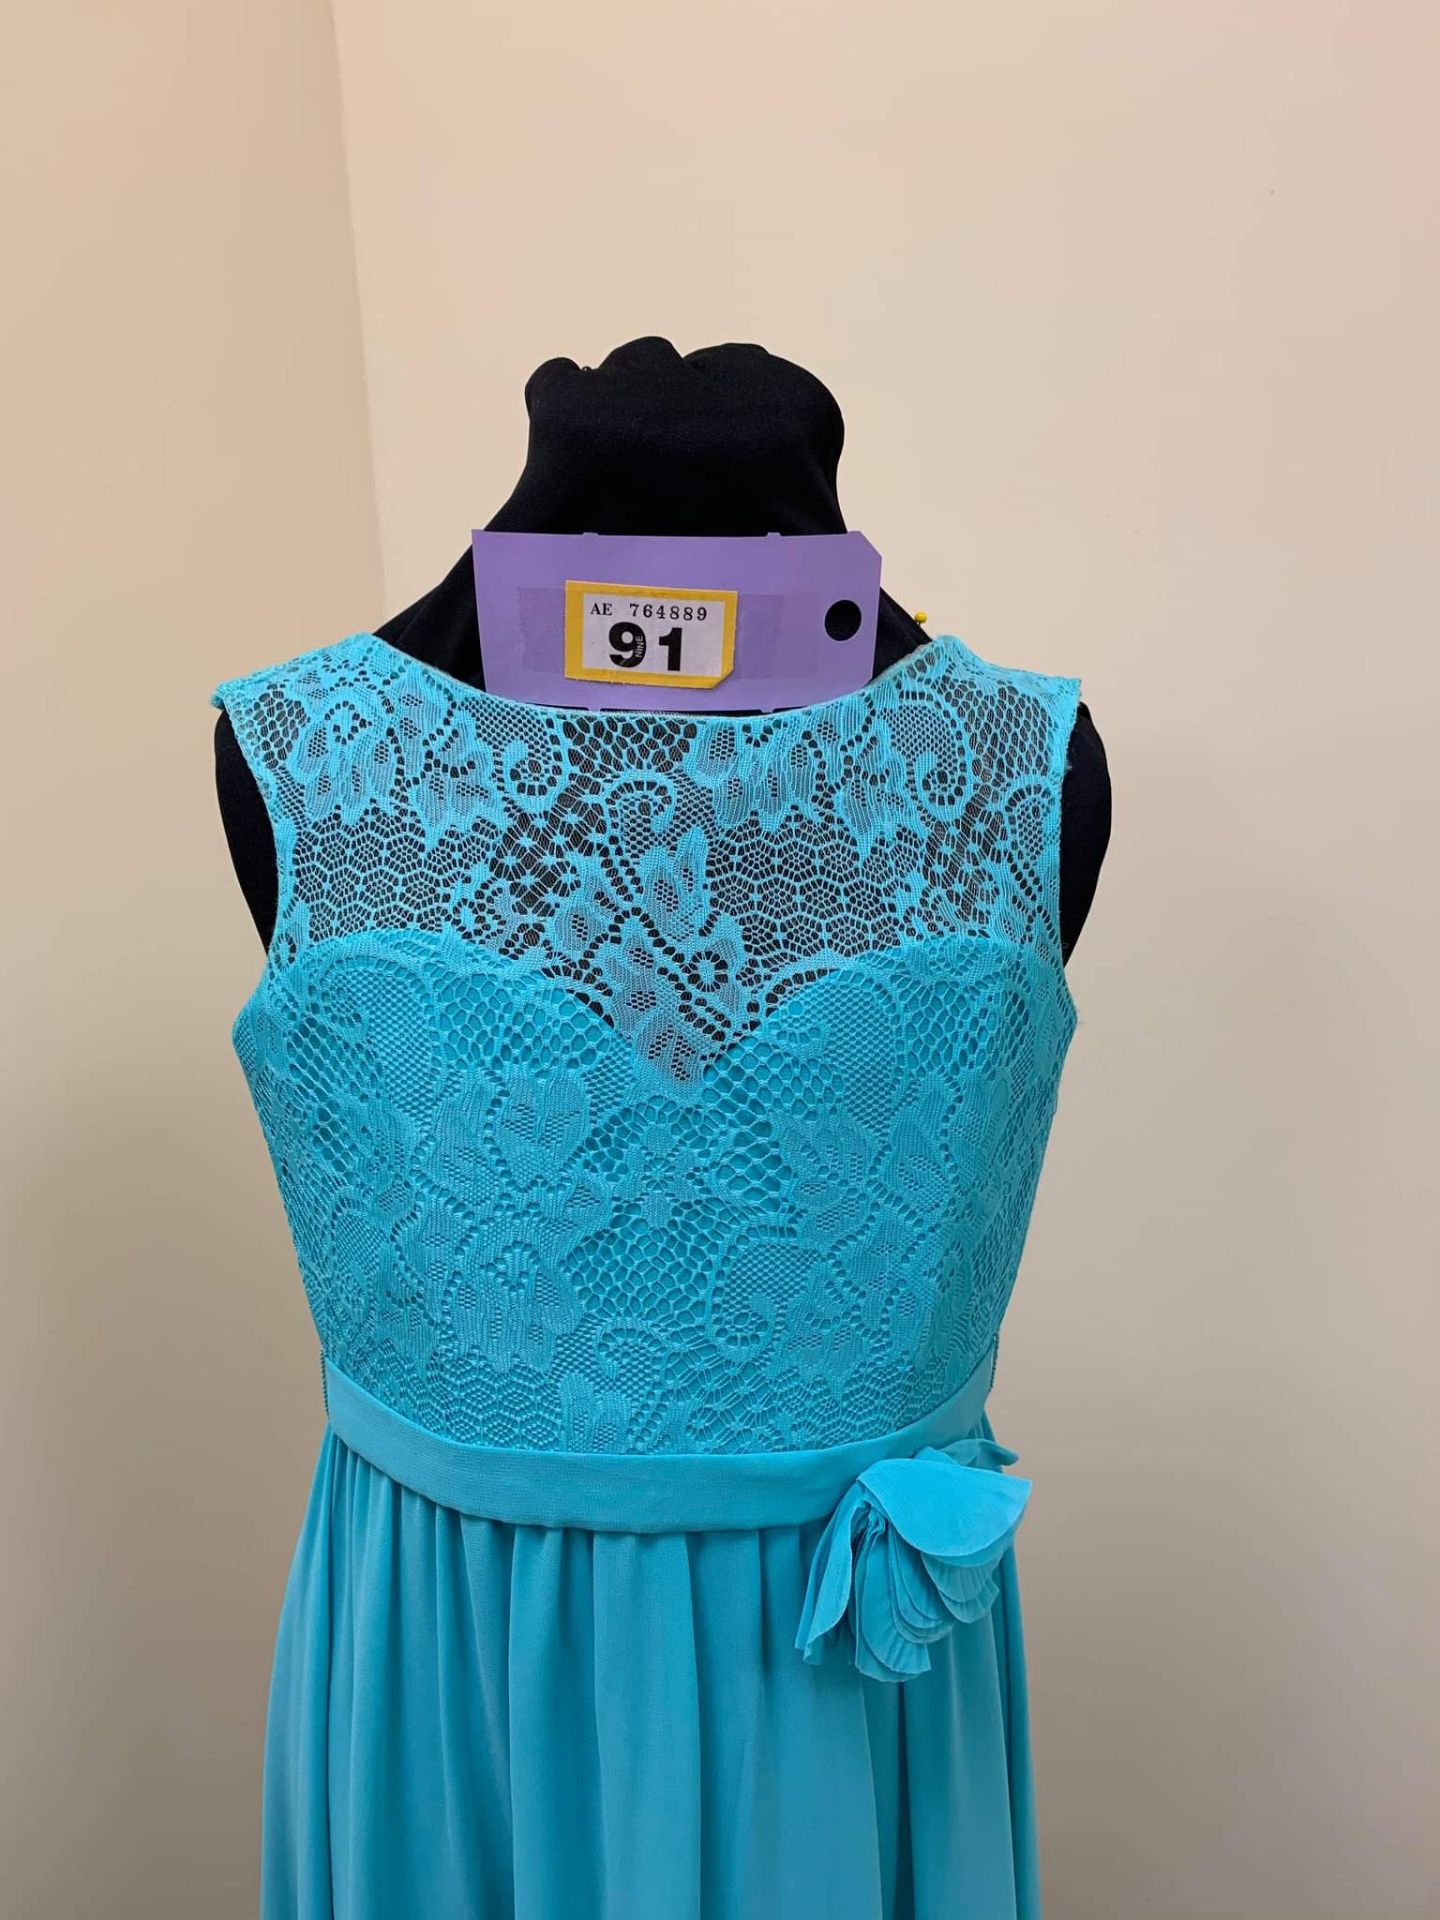 Tiffany Blue Lace Top Dress Age 9 - Image 5 of 10